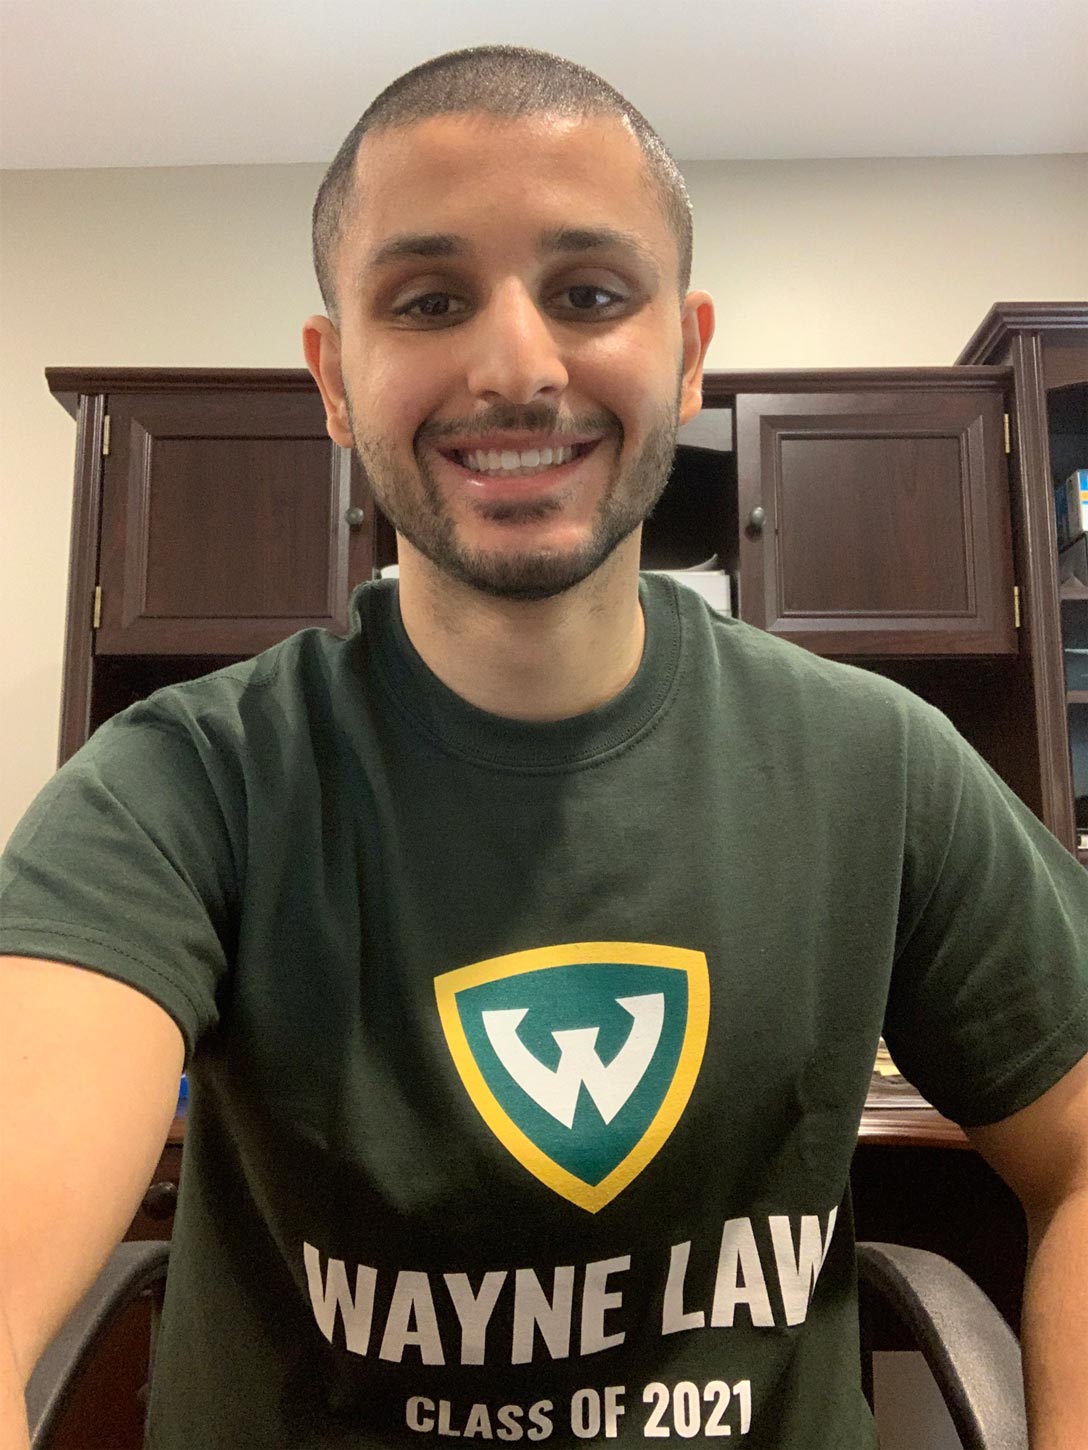 Boulos Saba smiles while taking a selfie, wearing  a Wayne Law class of 2021 shirt